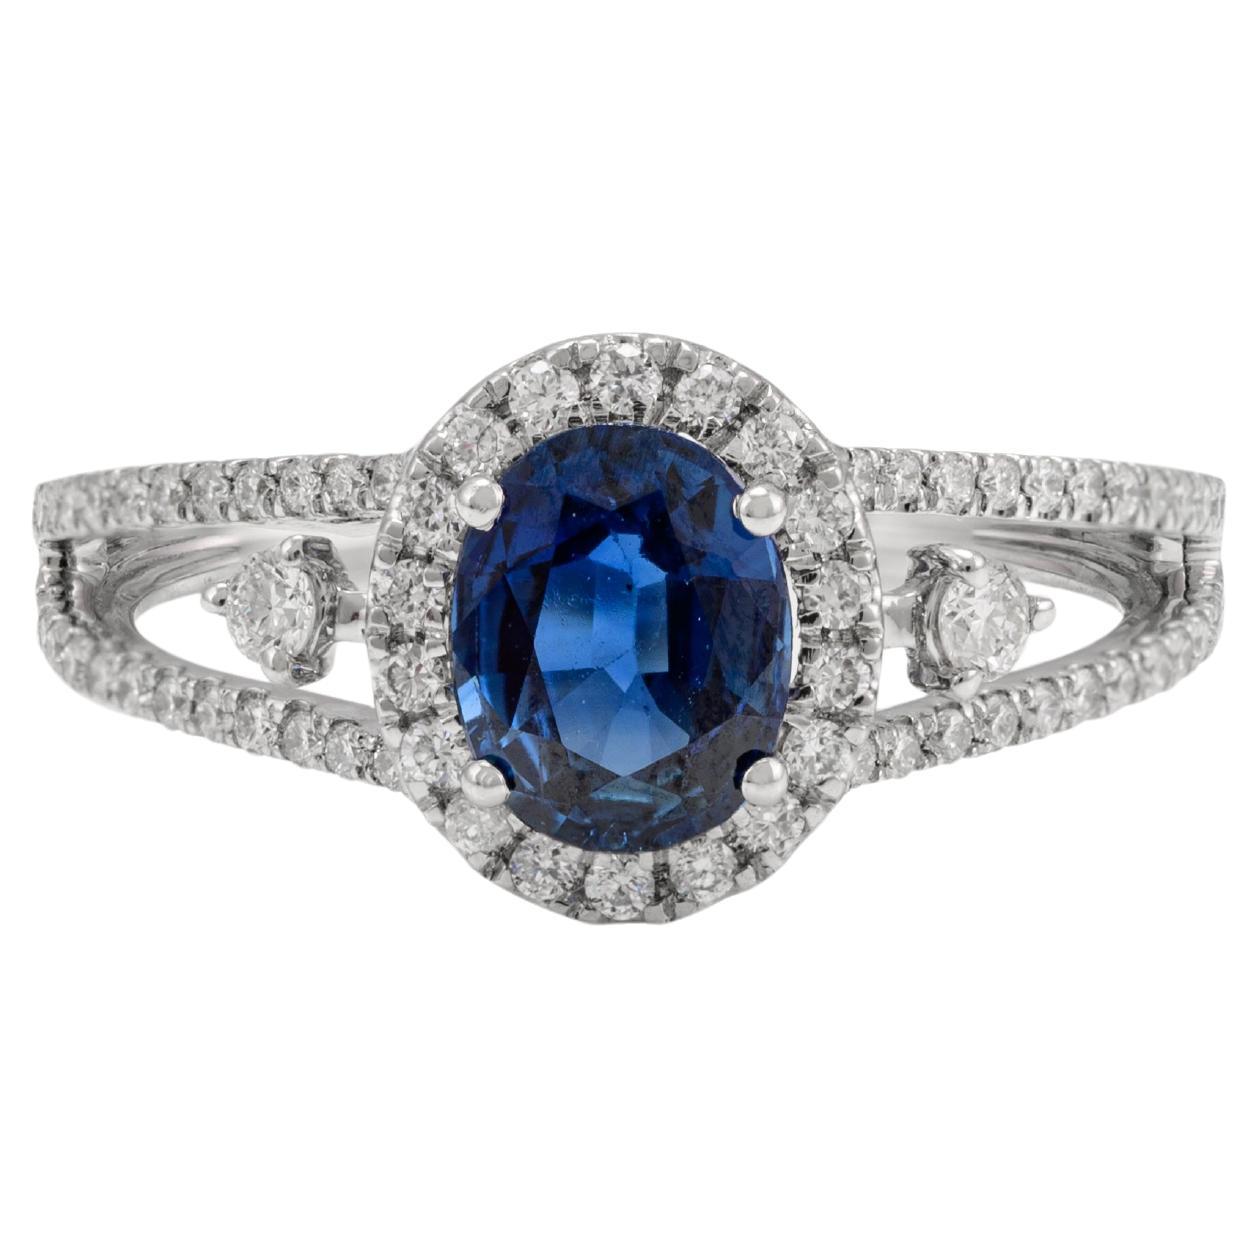 Certified Diamond and Oval Blue Sapphire Engagement Ring 18k Solid White Gold